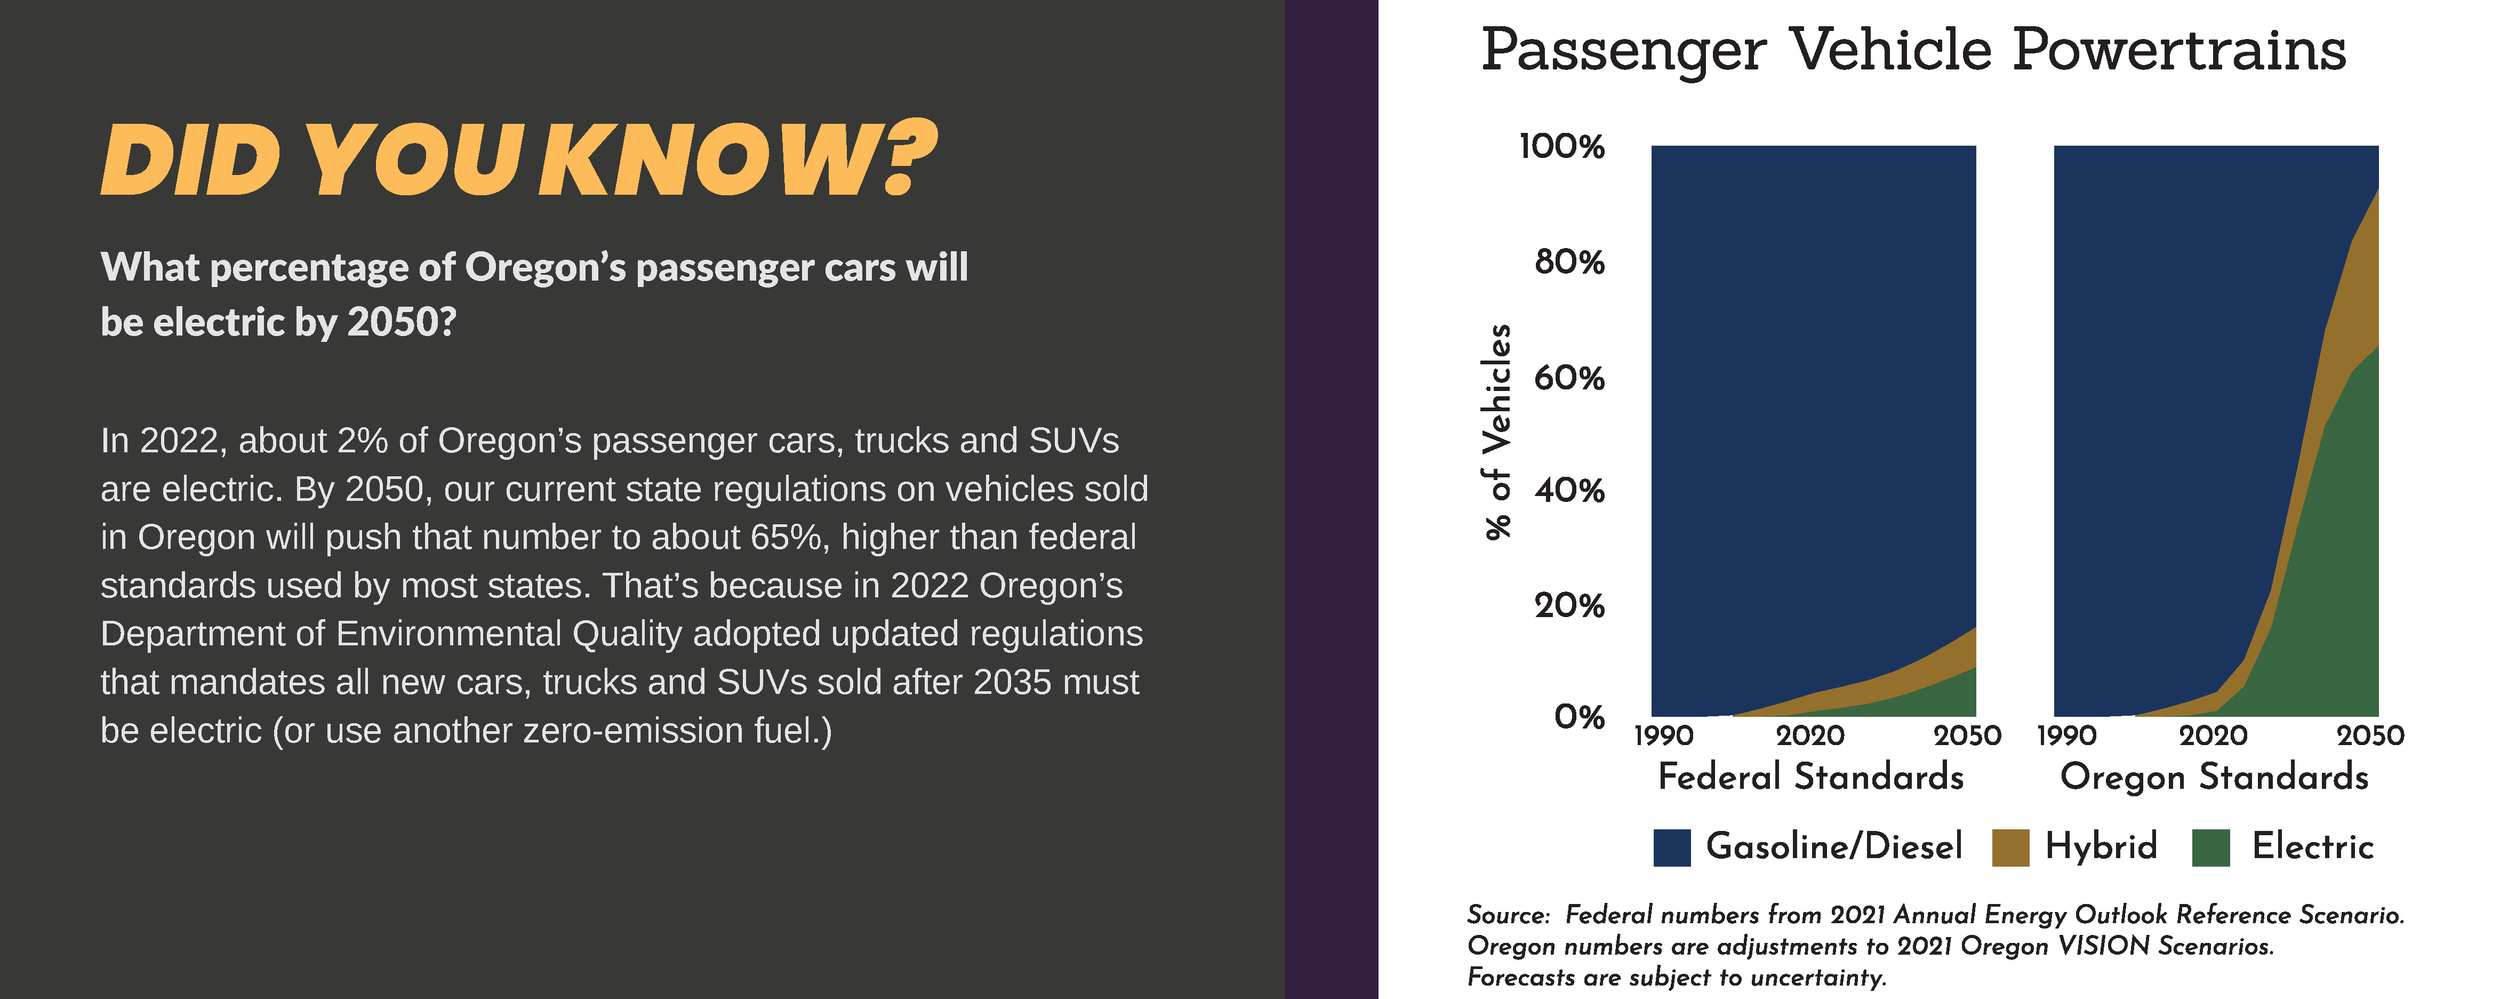 Did You Know - Passenger Vehicle Powertrains